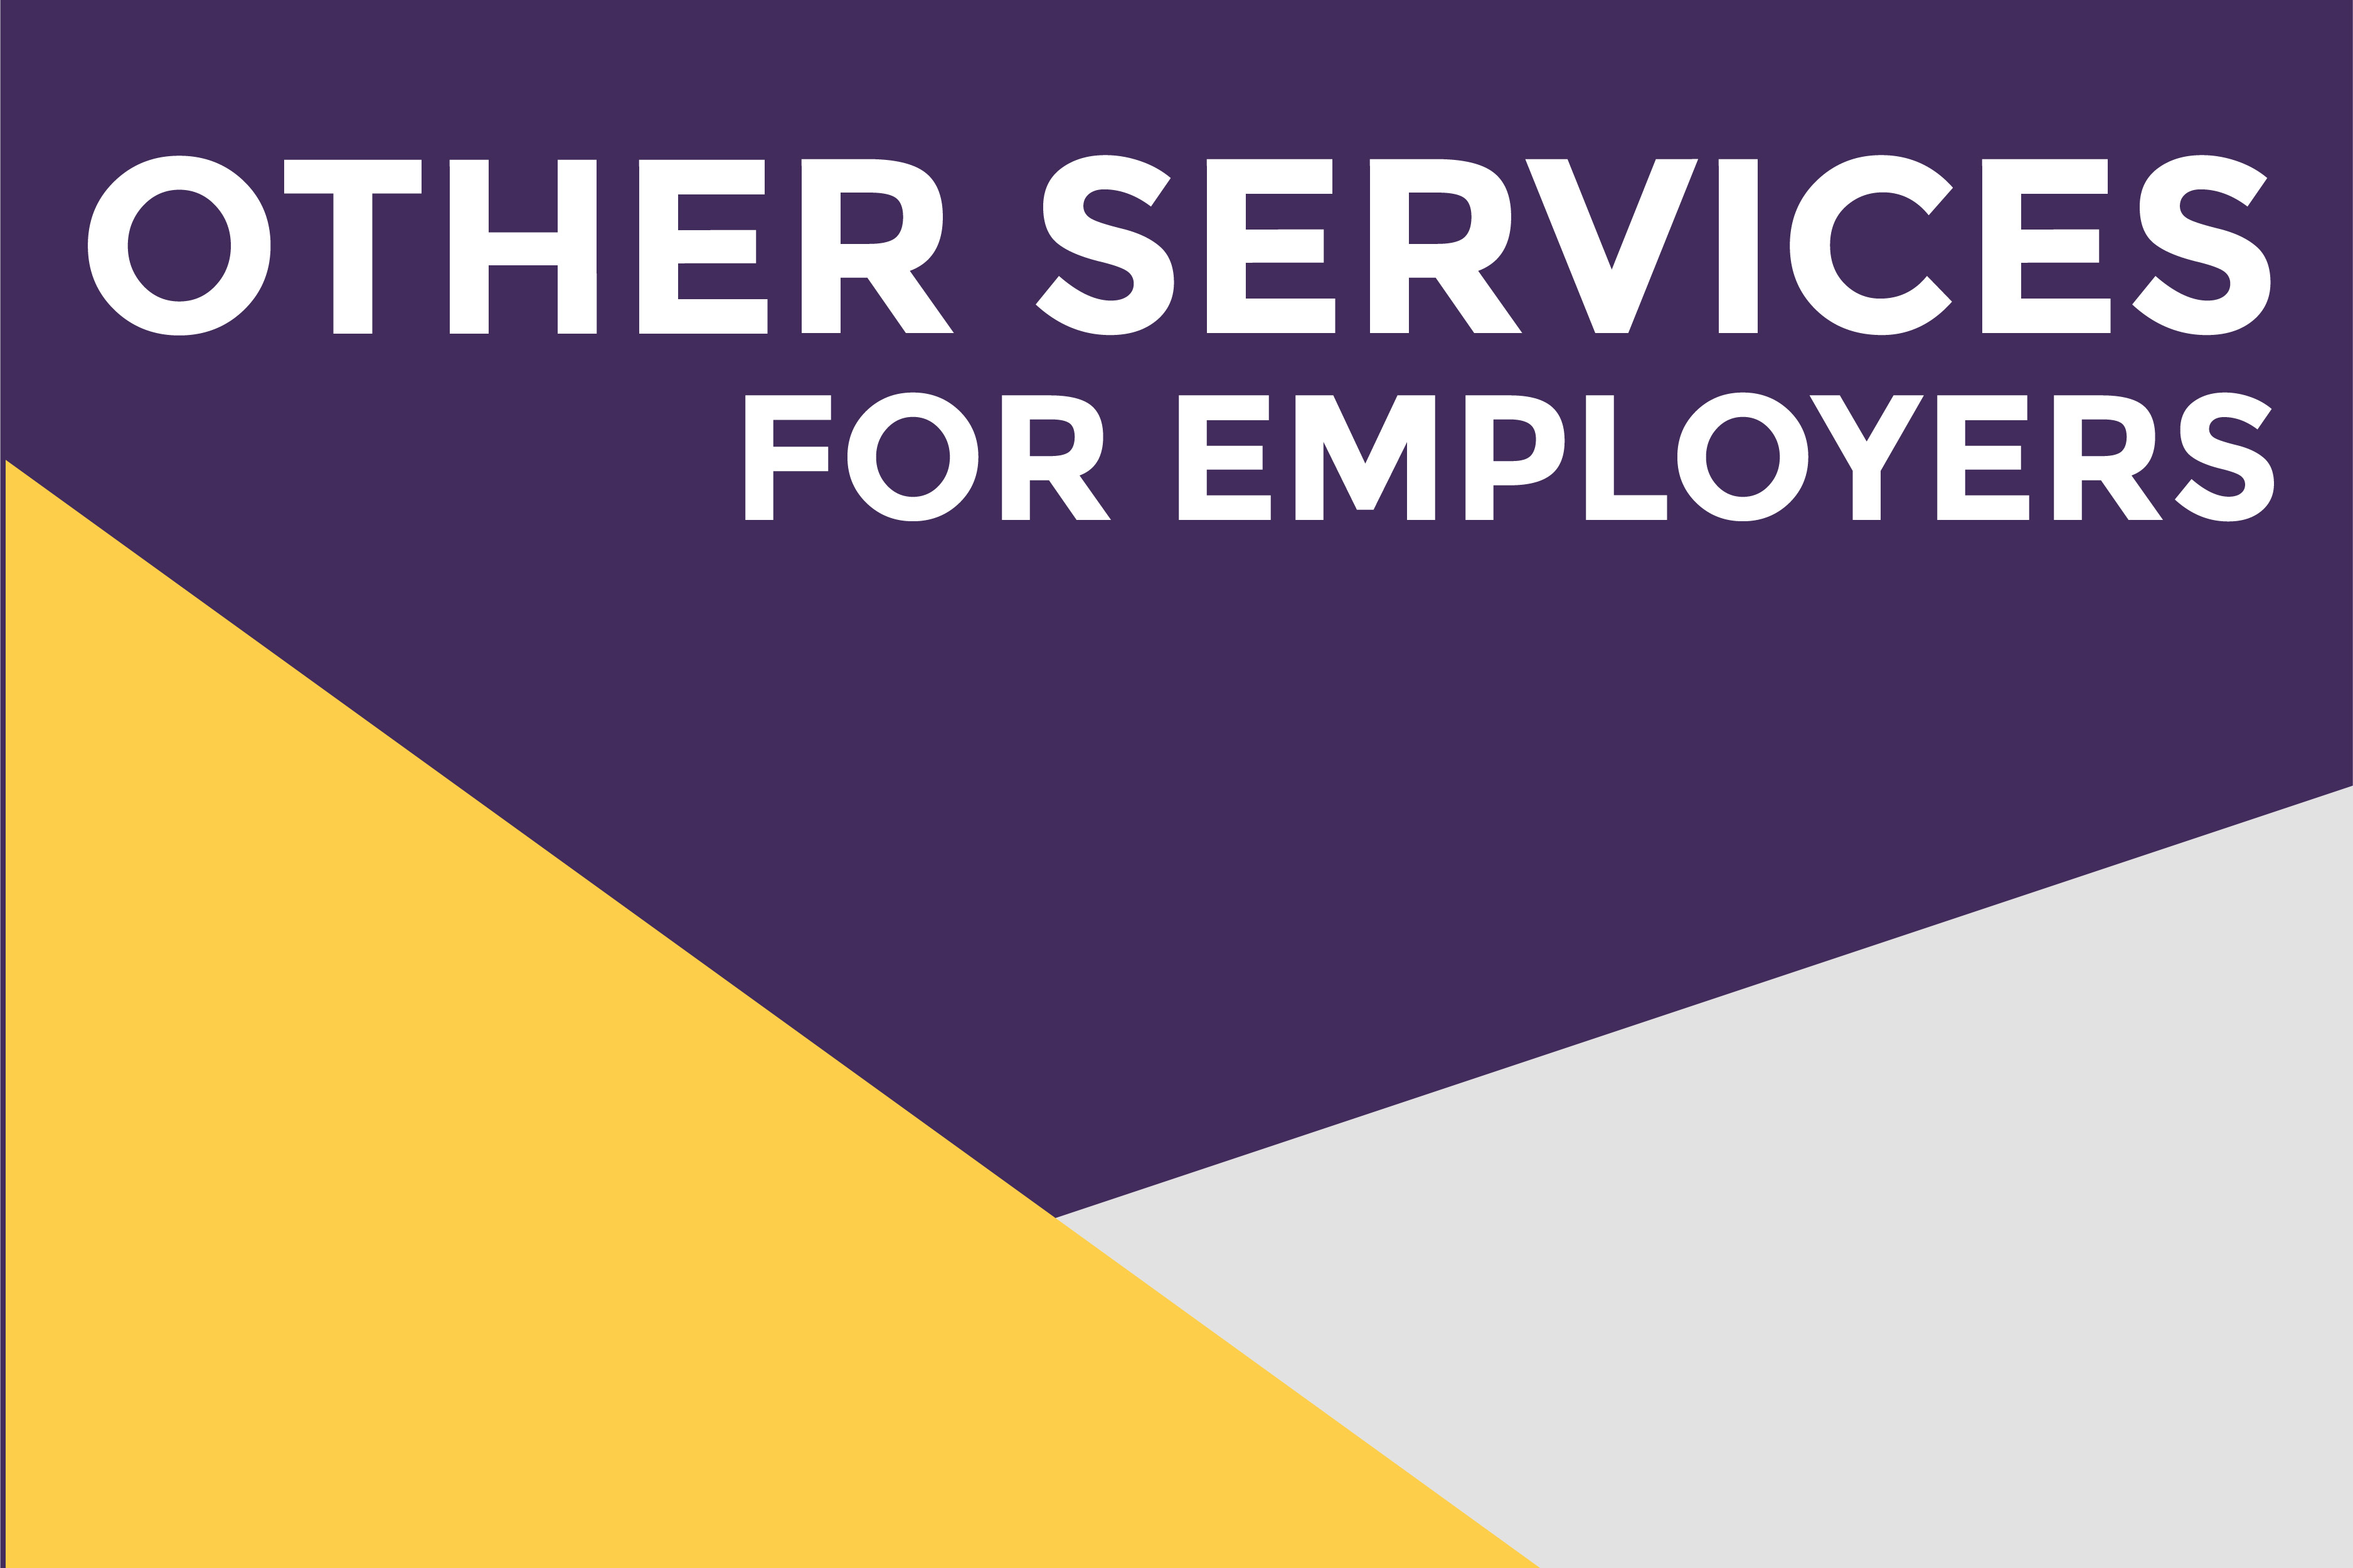 Other services for employers at UW-Whitewater